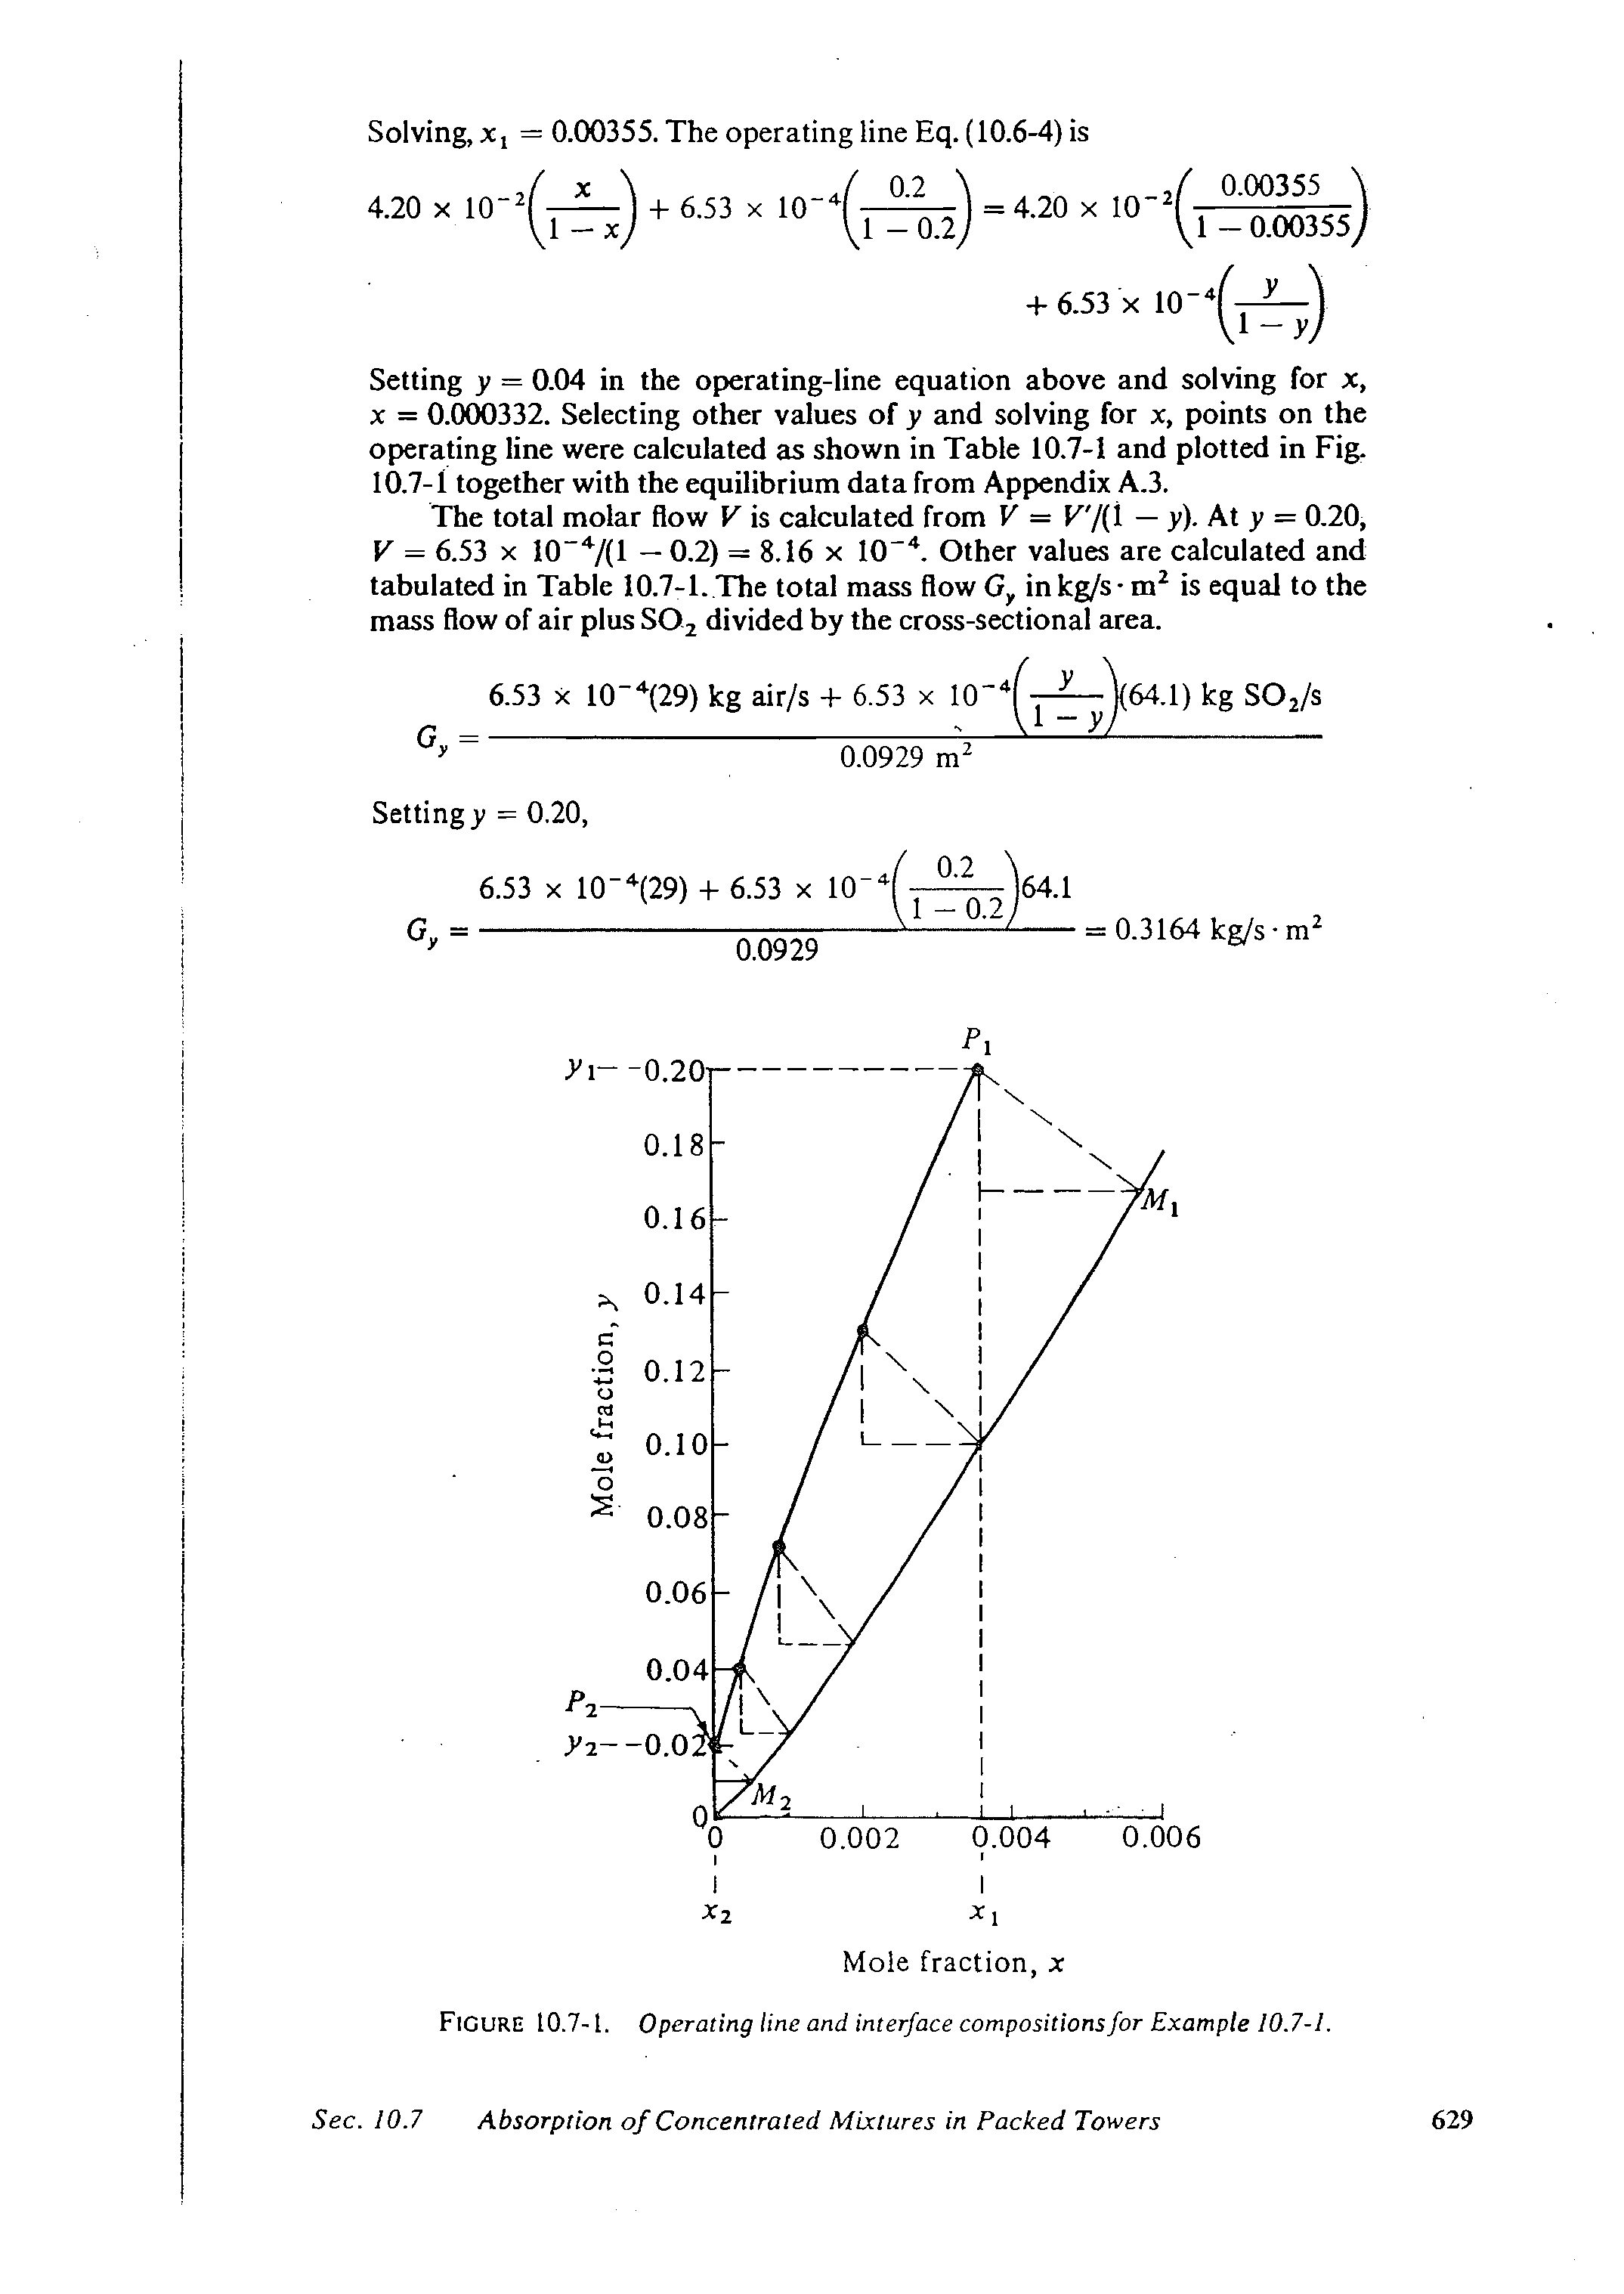 Figure 10.7-1. Operating line and interface compositions for Example 10.7-1. Sec. 10.7 Absorption of Concentrated Mixtures in Packed Towers...